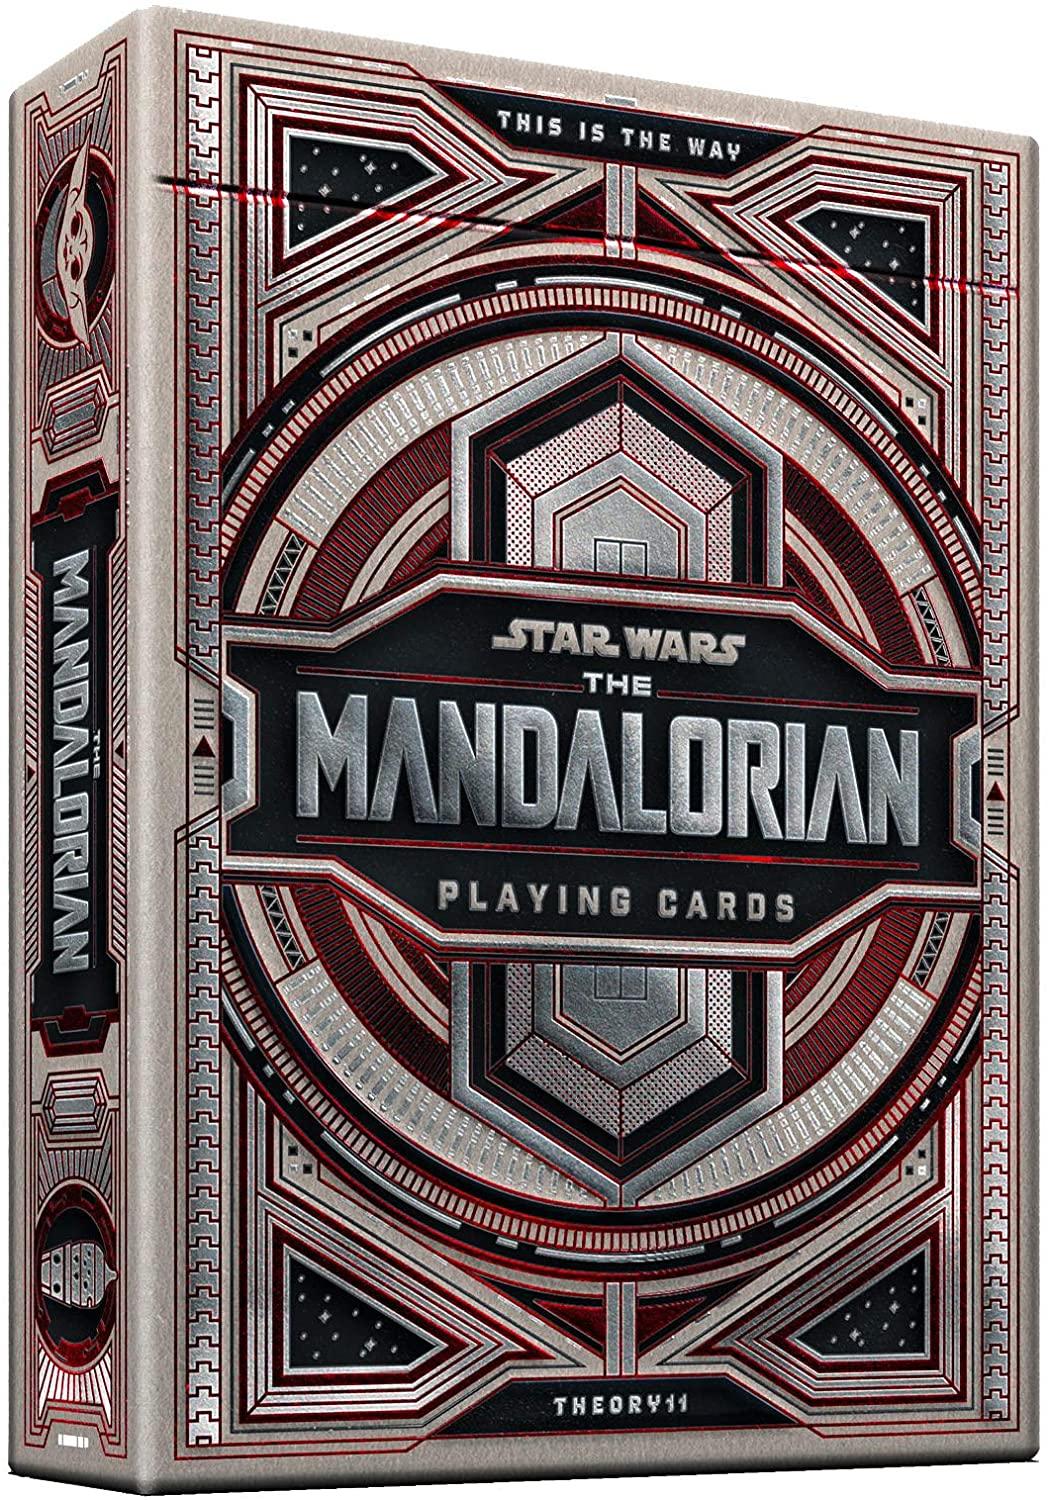 Mandalorian Playing Cards by Theory 11